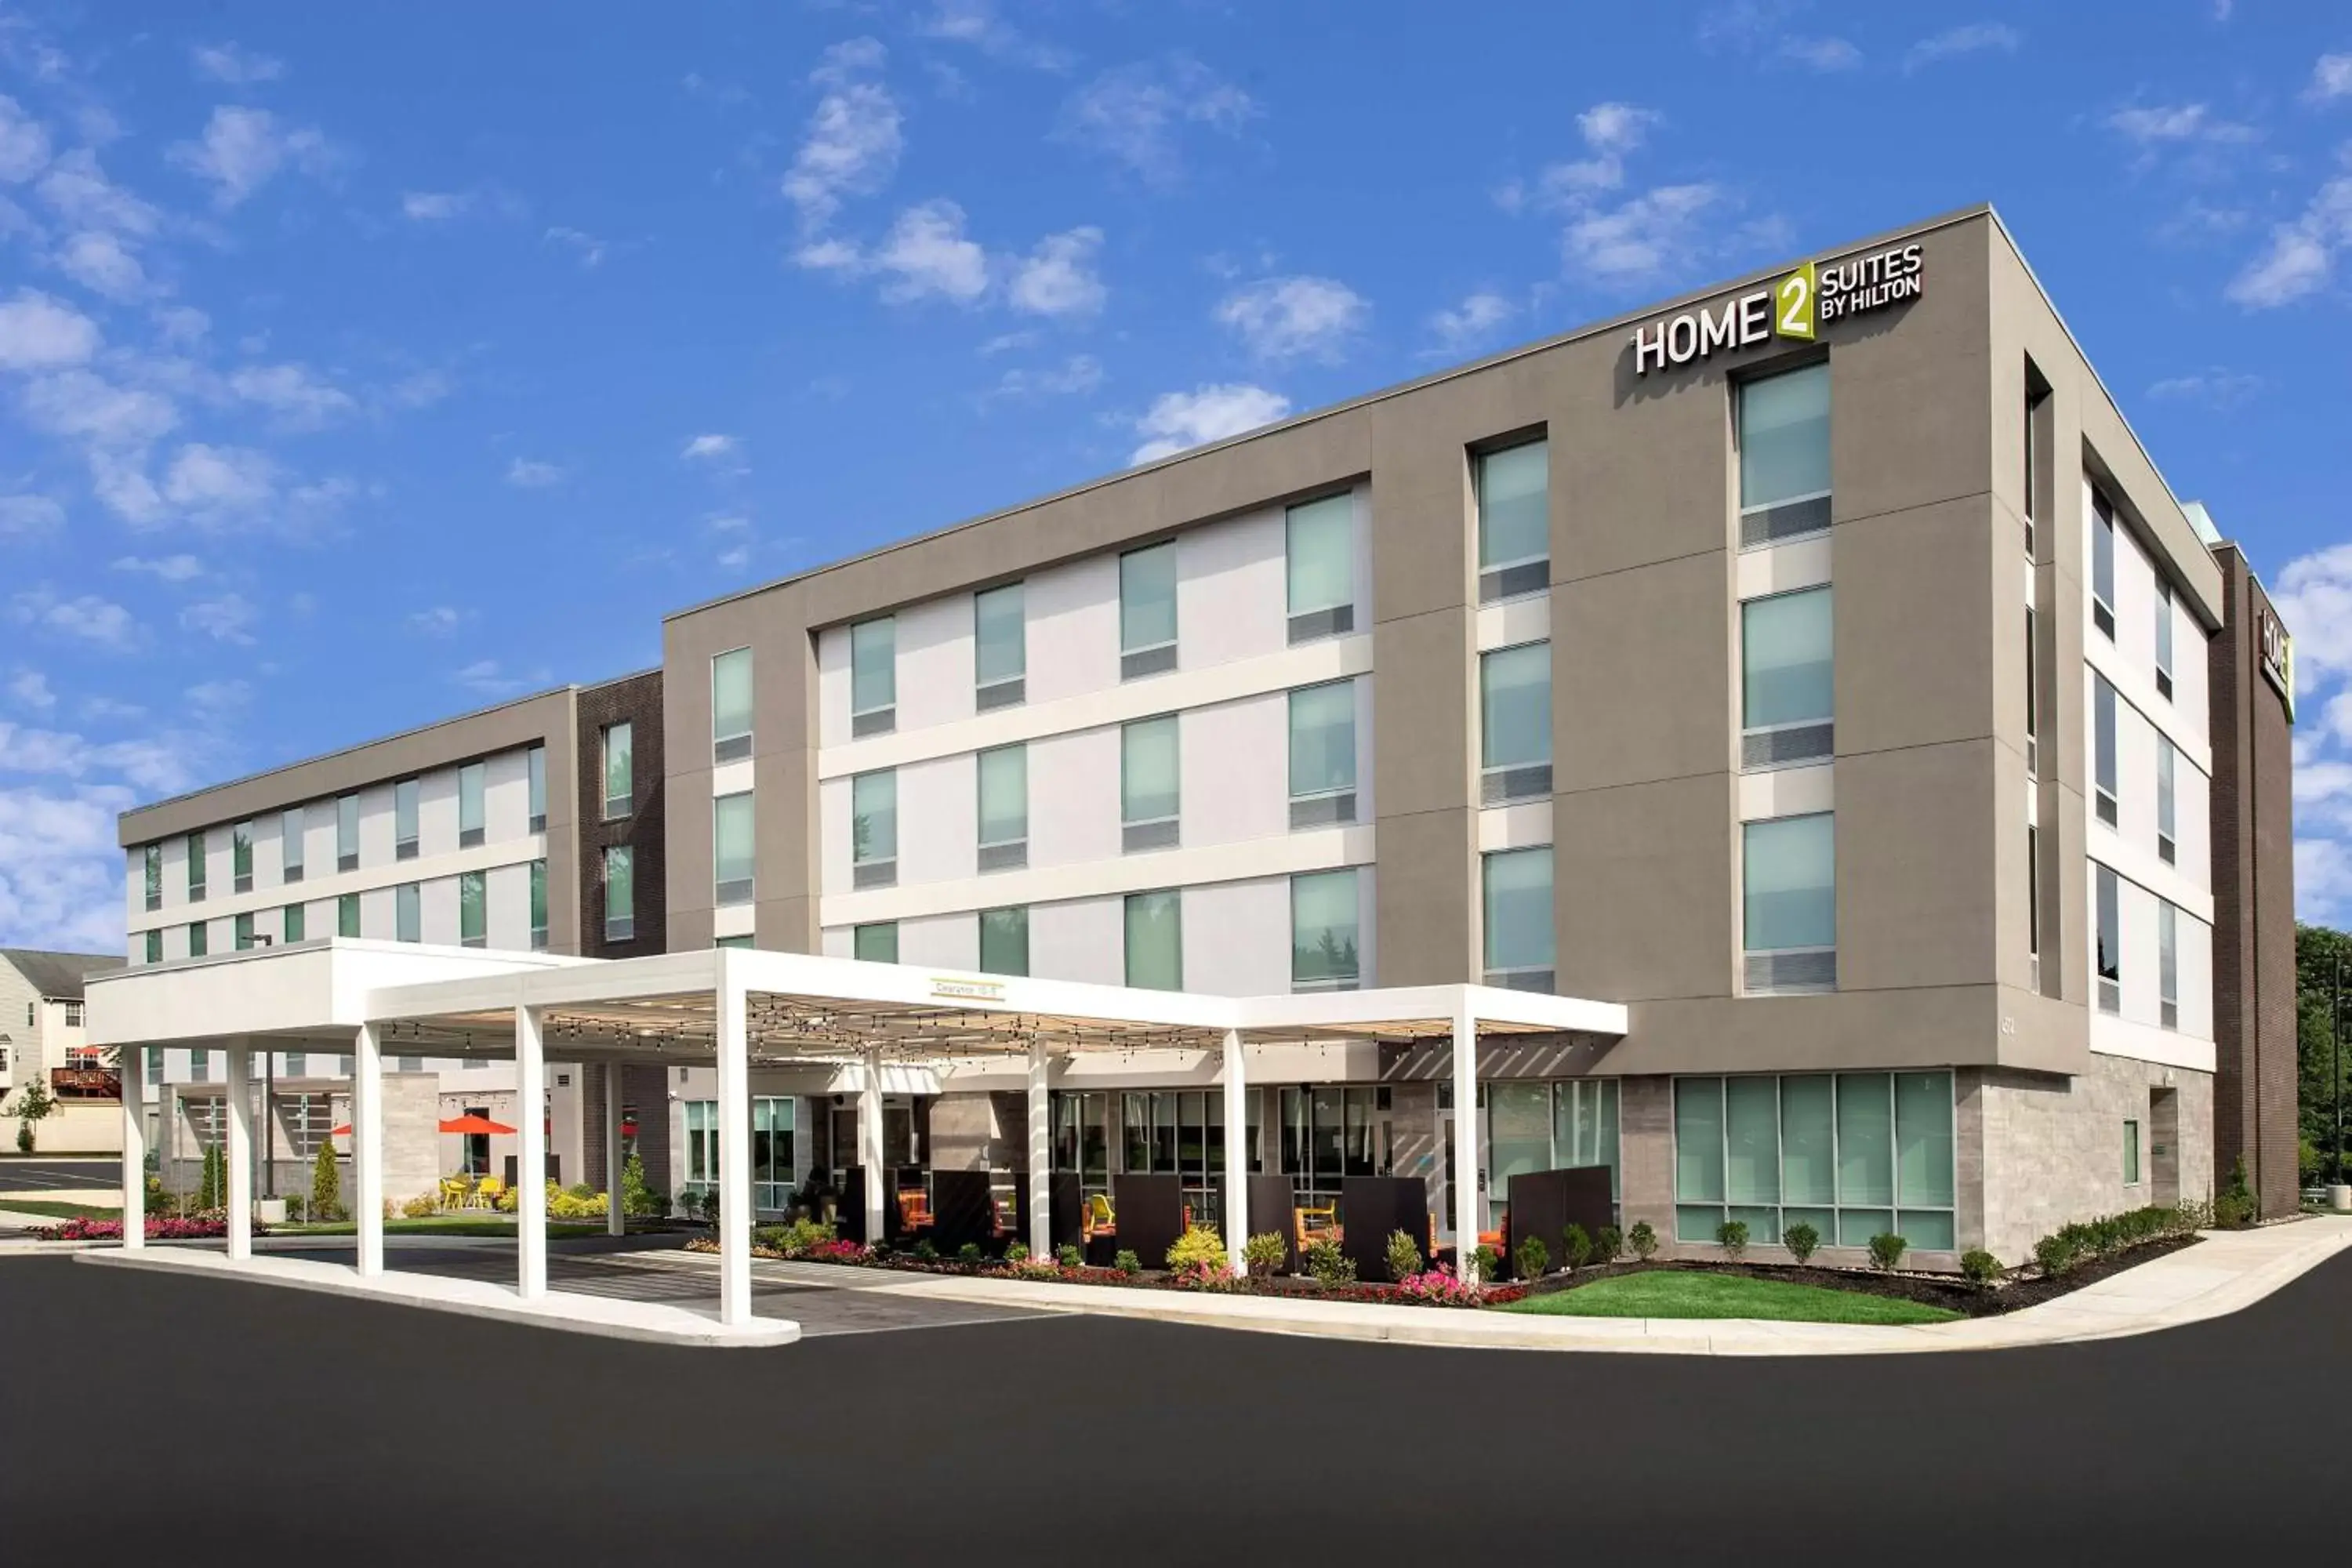 Property Building in Home2 Suites By Hilton Owings Mills, Md